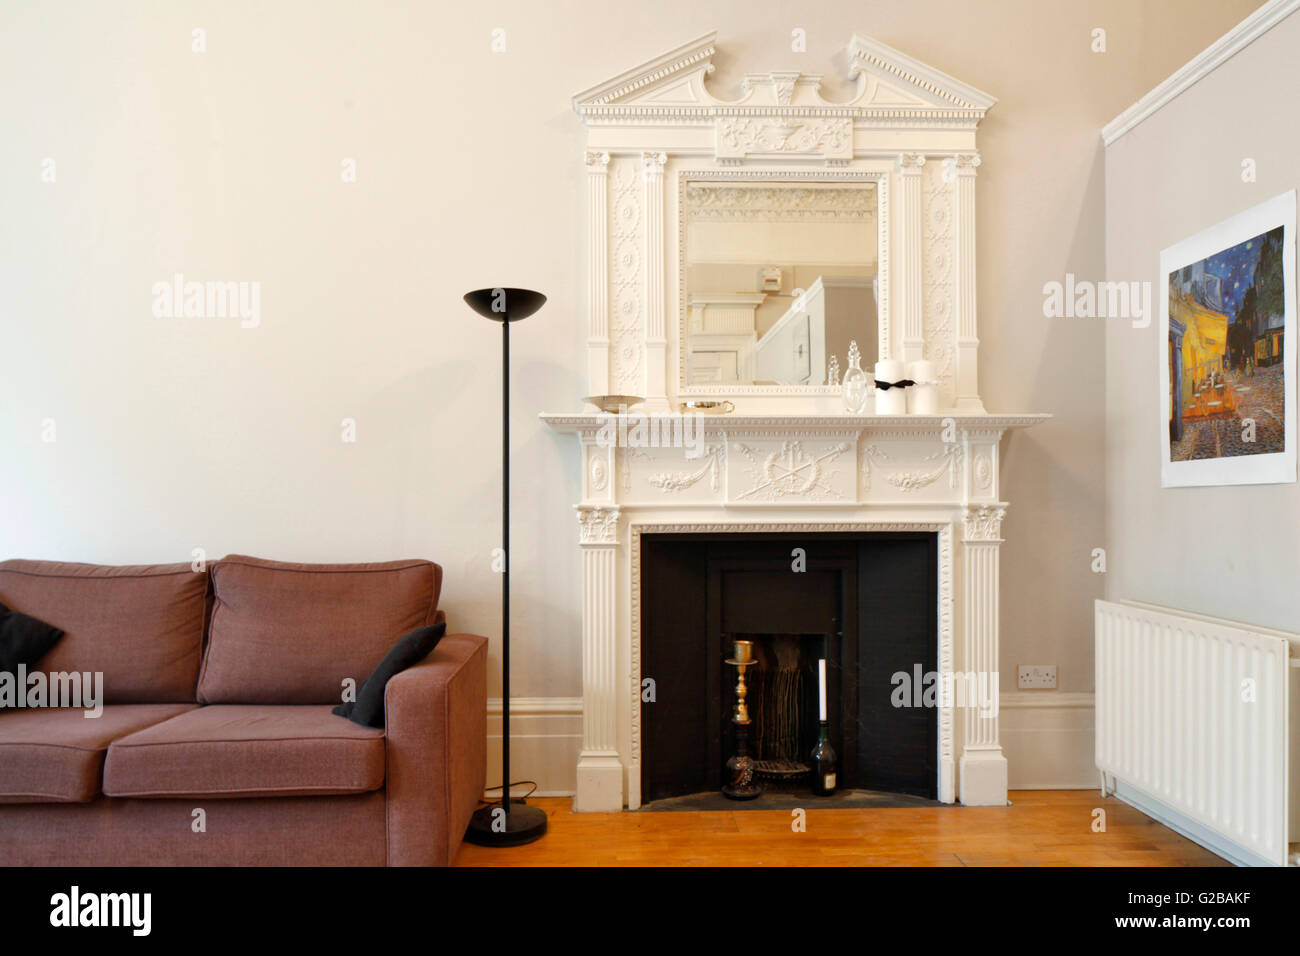 Pembridge Square, Notting Hill. View of a traditional fireplace with a mirror above it. Partial view of a couch. Picture hanging on the wall above wall radiator. Stock Photo